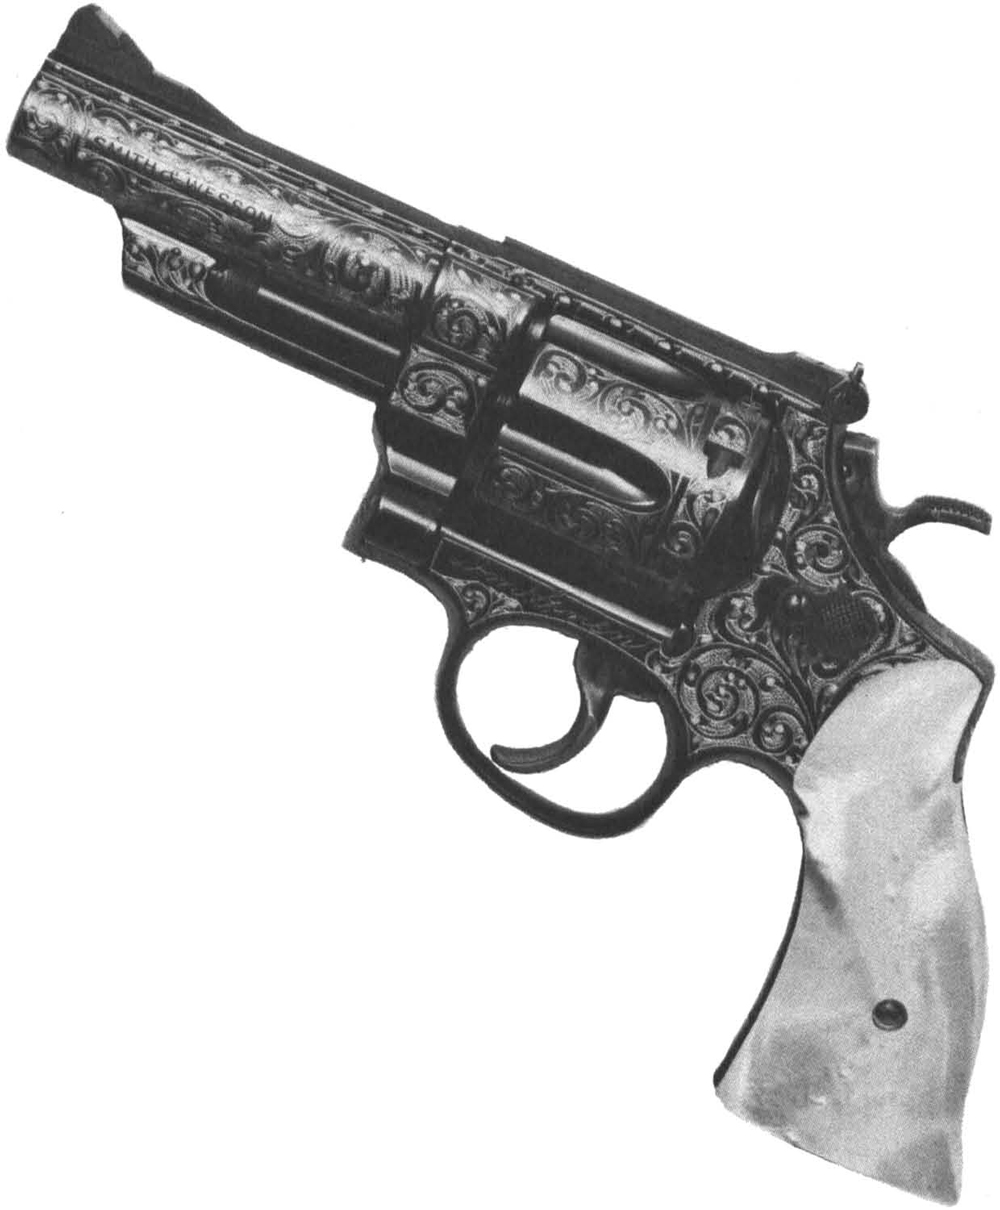 The first S & W 44 Magnum with 4-inch barrel, engraved and stocked by the Gun Reblu Co., Biltmore, N. C.